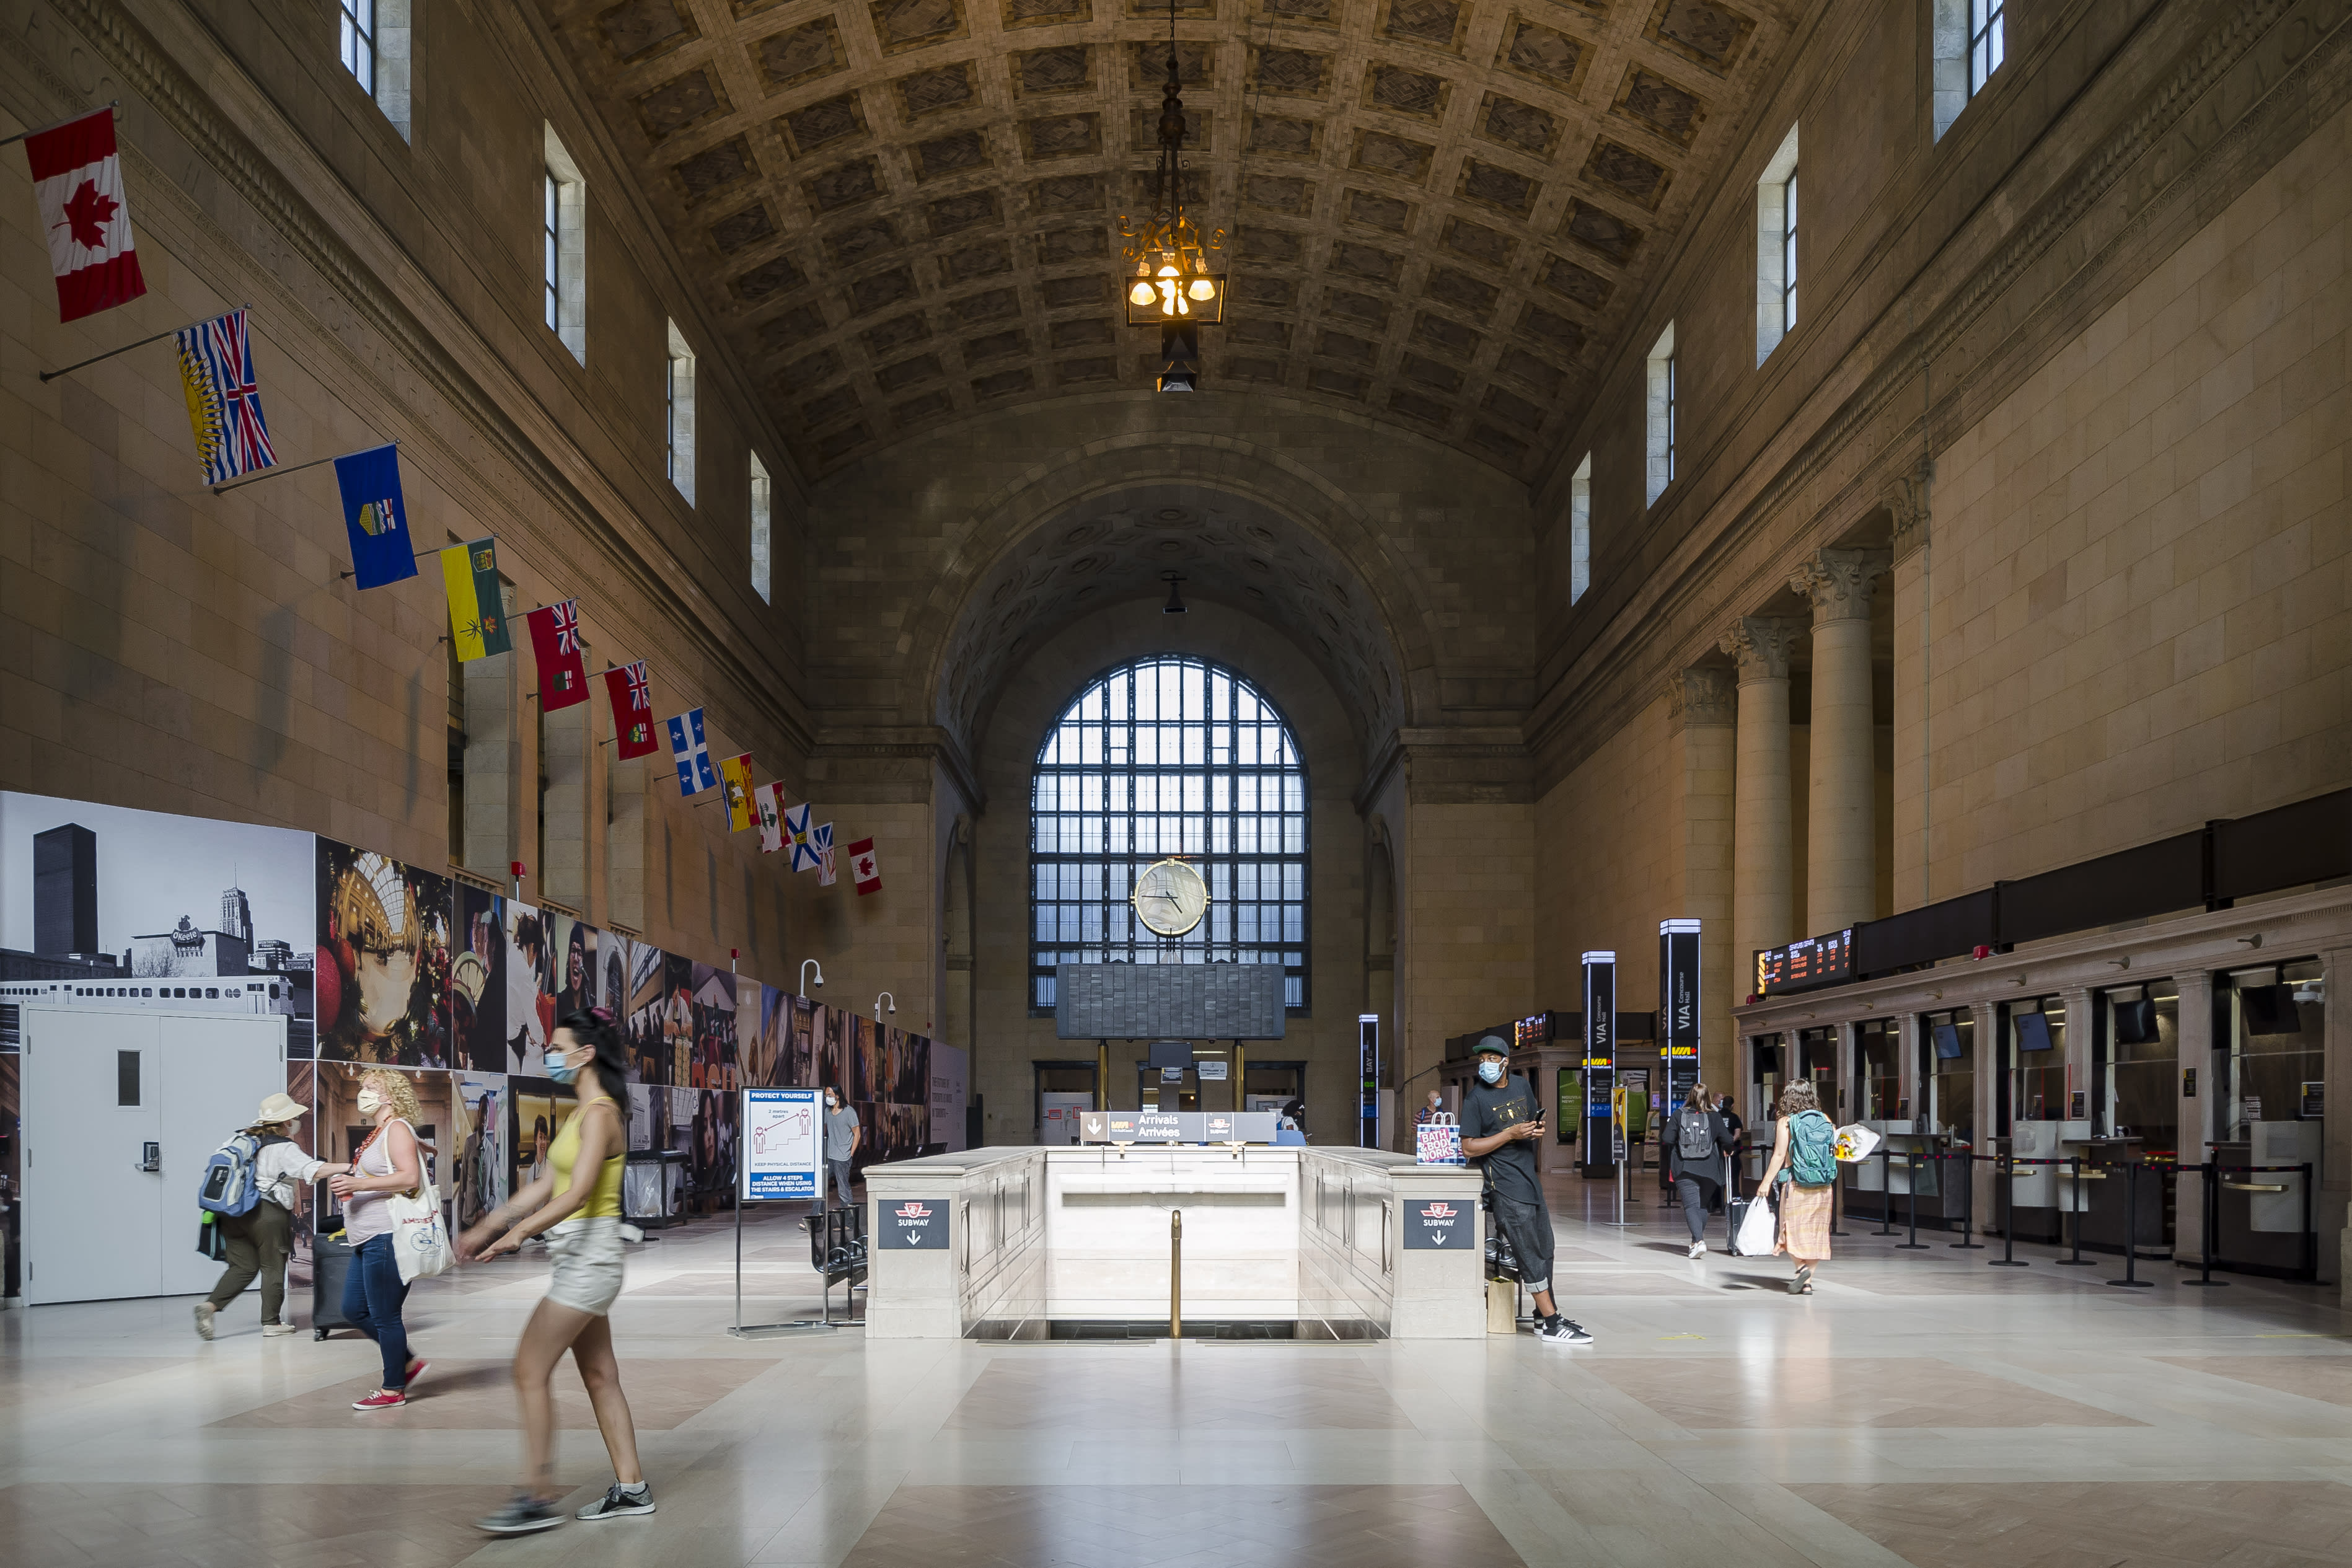 A Inside Union Station's iconic Great Hall with the clock tower and people walking around